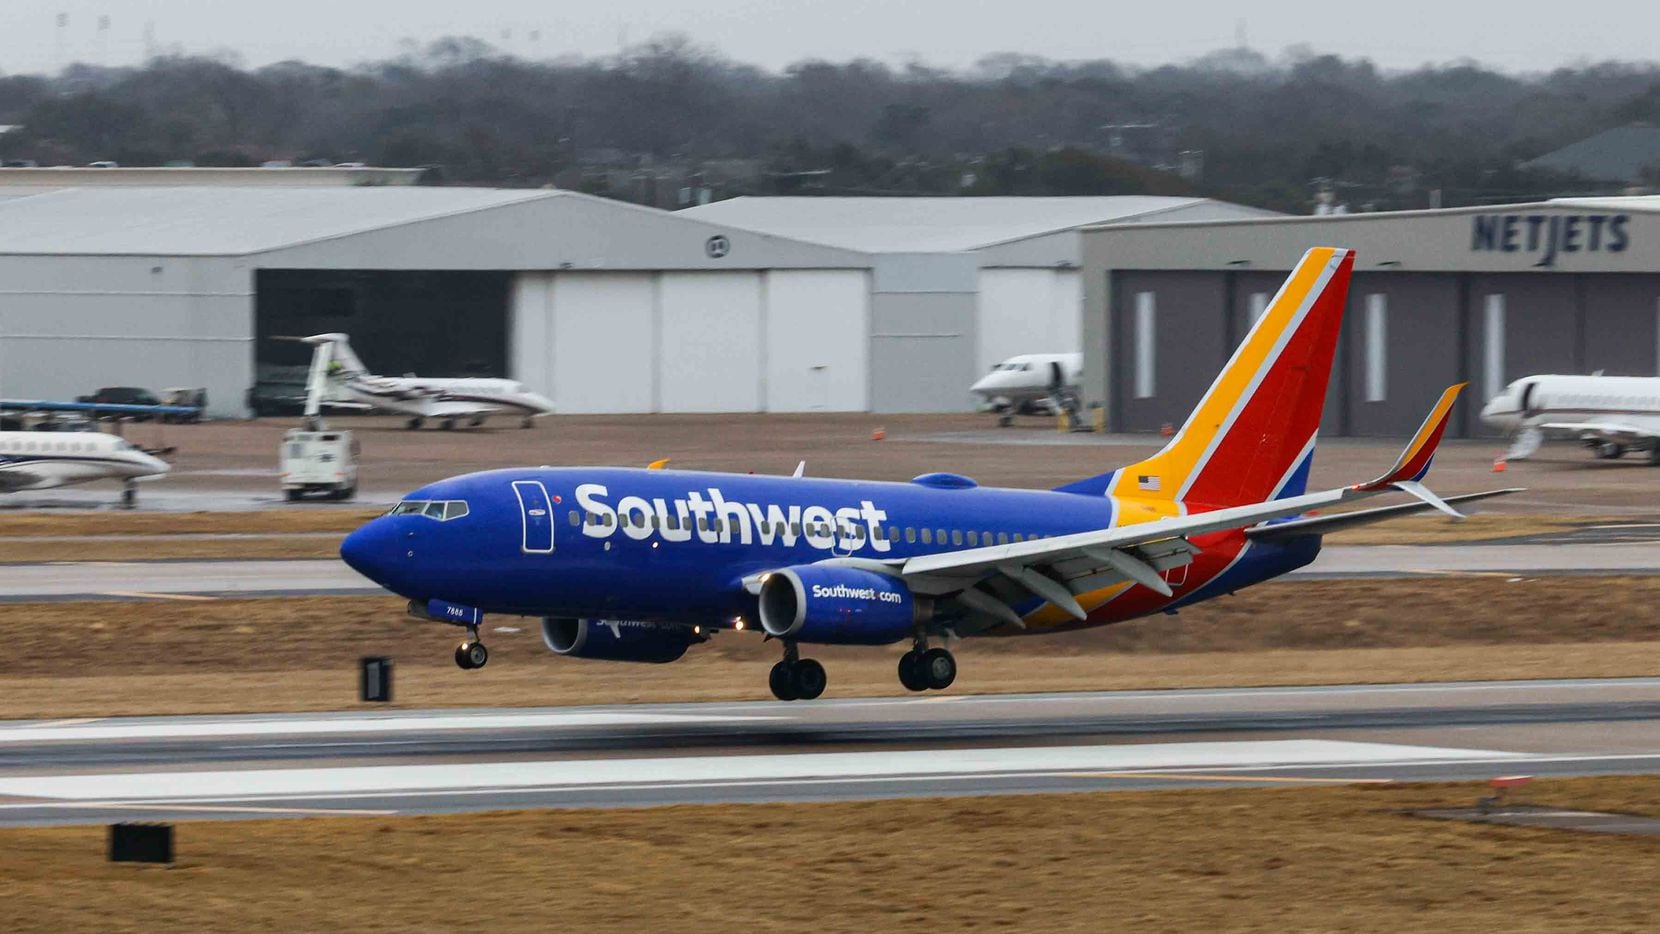 A Southwest Airlines plane lands at the runway of Dallas Love Field Airport in Dallas on...